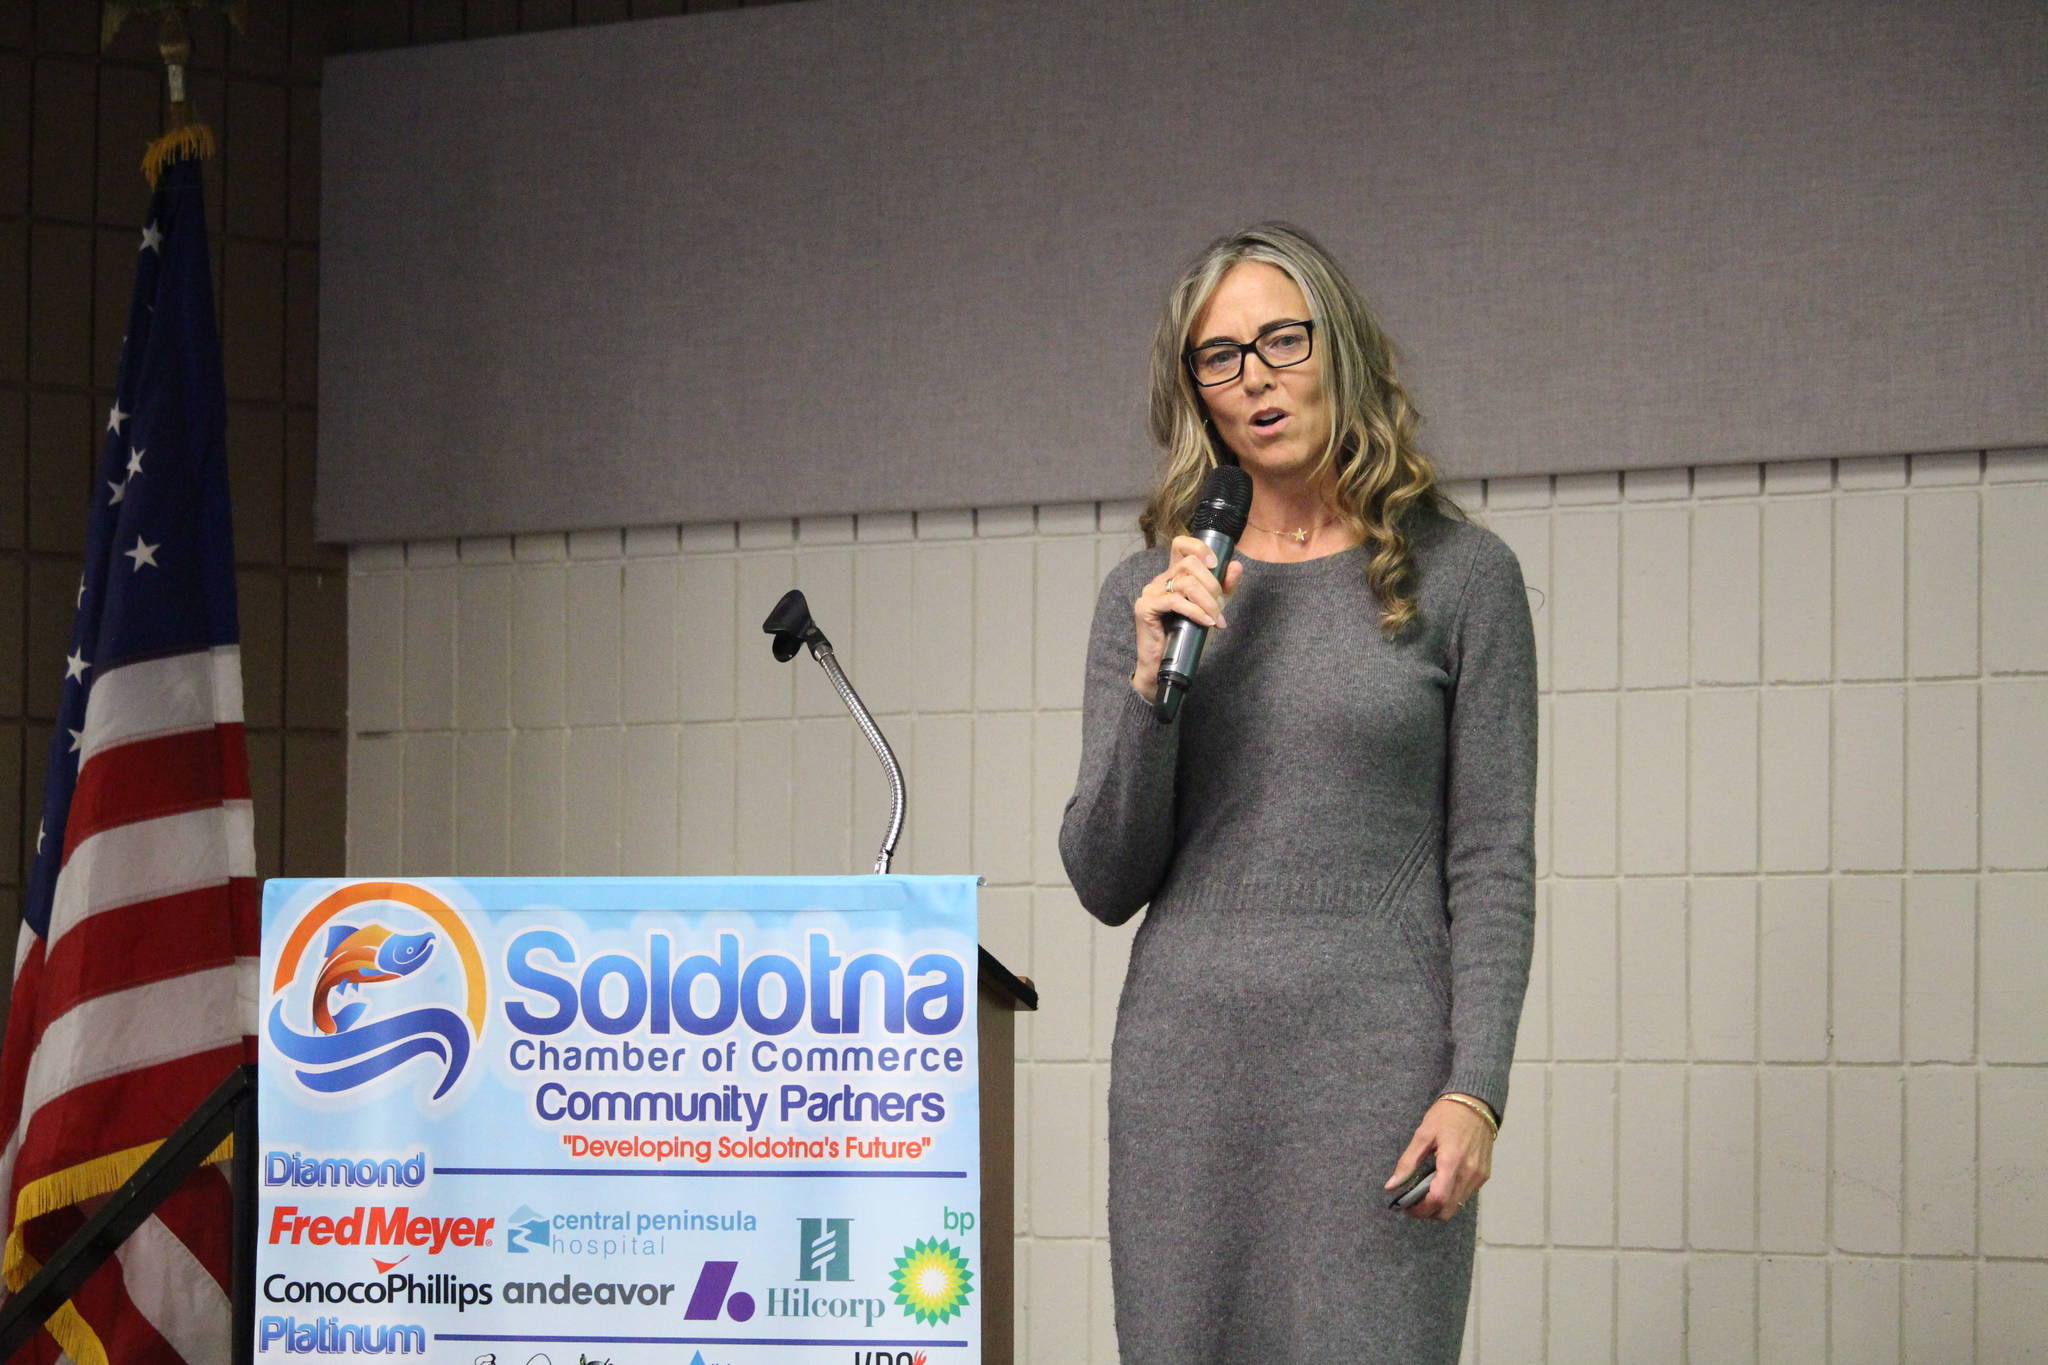 Dr. Kelly Olson, Associate Director of Clinical Affairs for Millennium Health, gives a presentation to the Kenai and Soldotna Chambers of Commerce at the Soldotna Regional Sports Complex on Wednesday, Nov. 13, 2019. (Photo by Brian Mazurek/Peninsula Clarion)